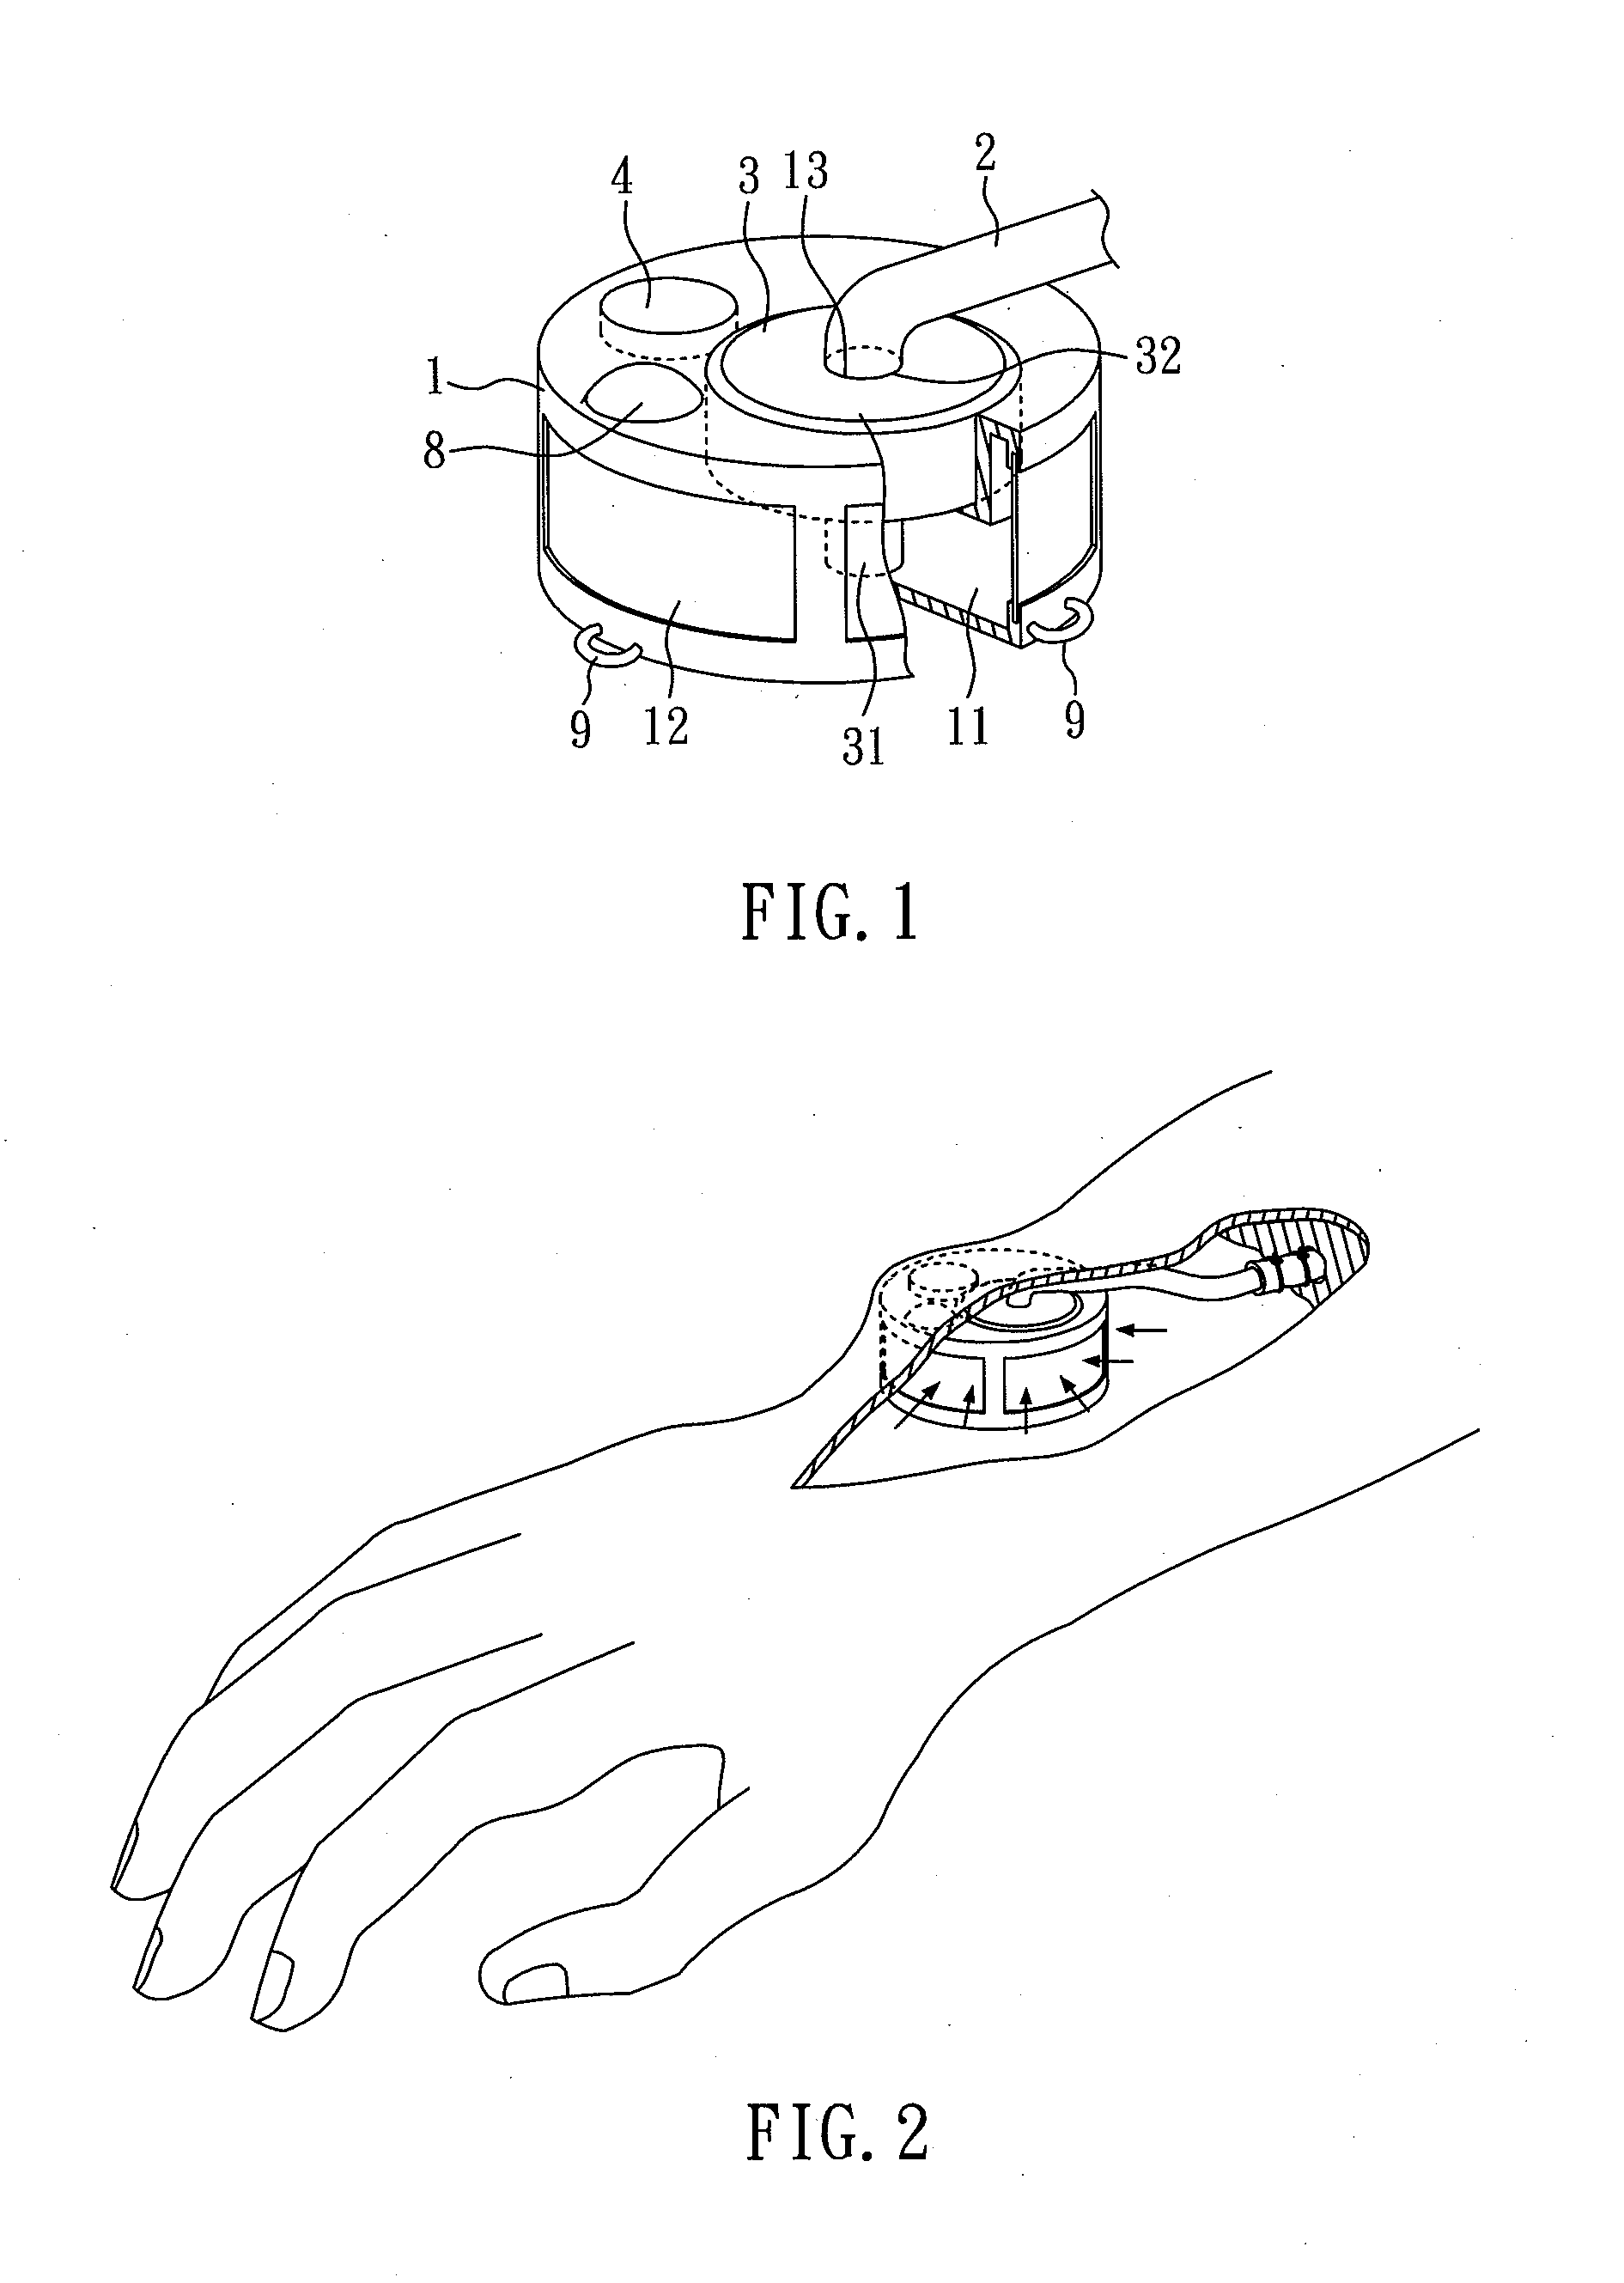 Device for draining lymph into vein